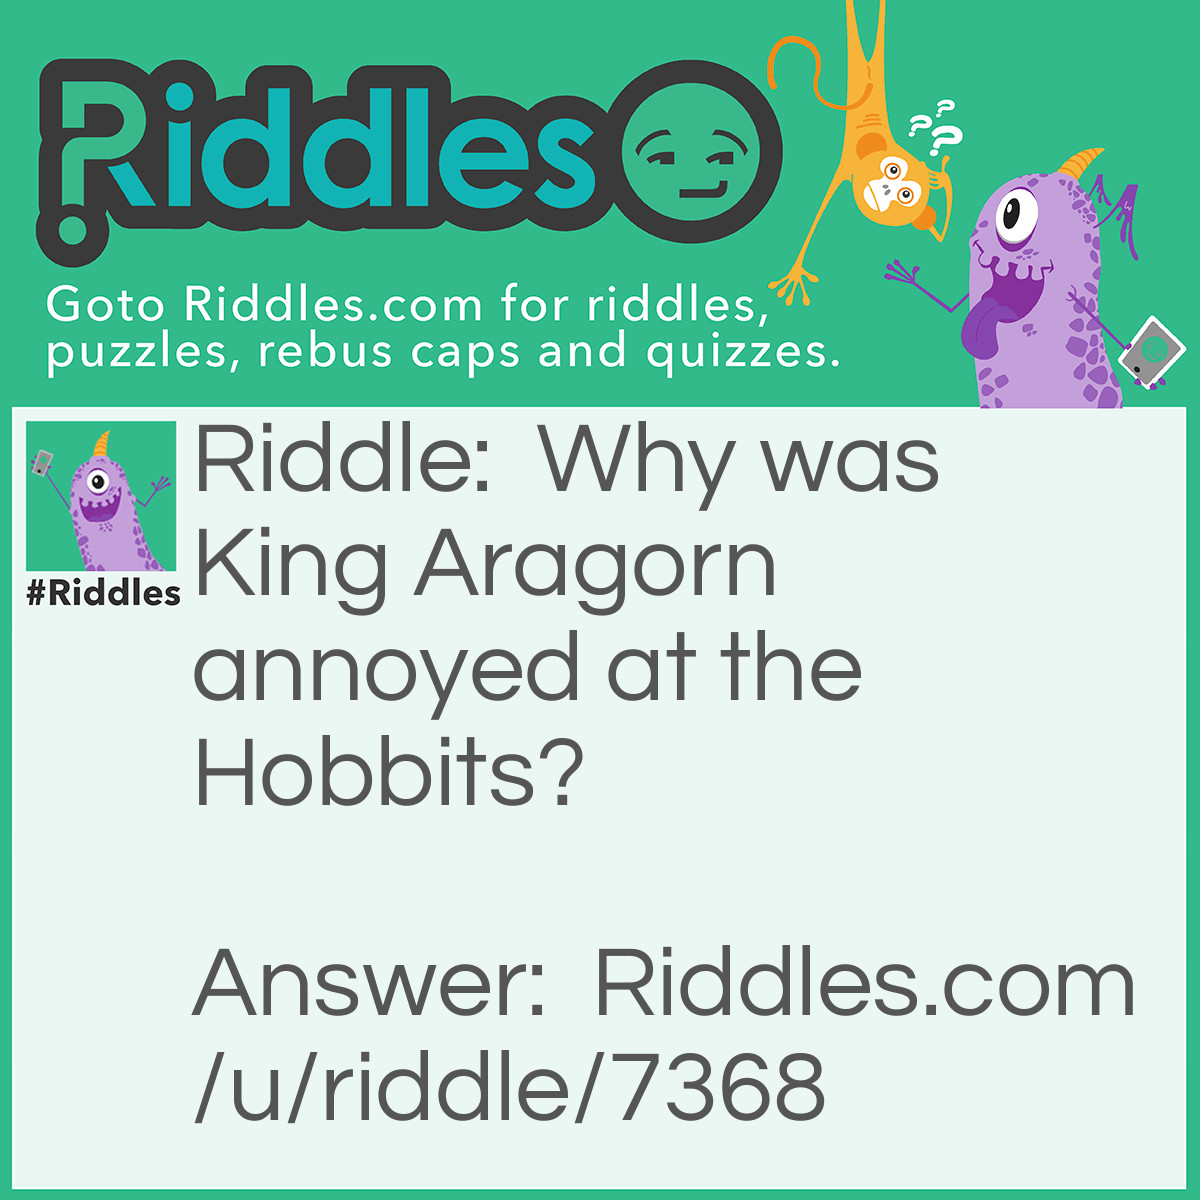 Riddle: Why was King Aragorn annoyed at the Hobbits? Answer: Because he told them to bow to no one, but they didn't bow to Arwen.